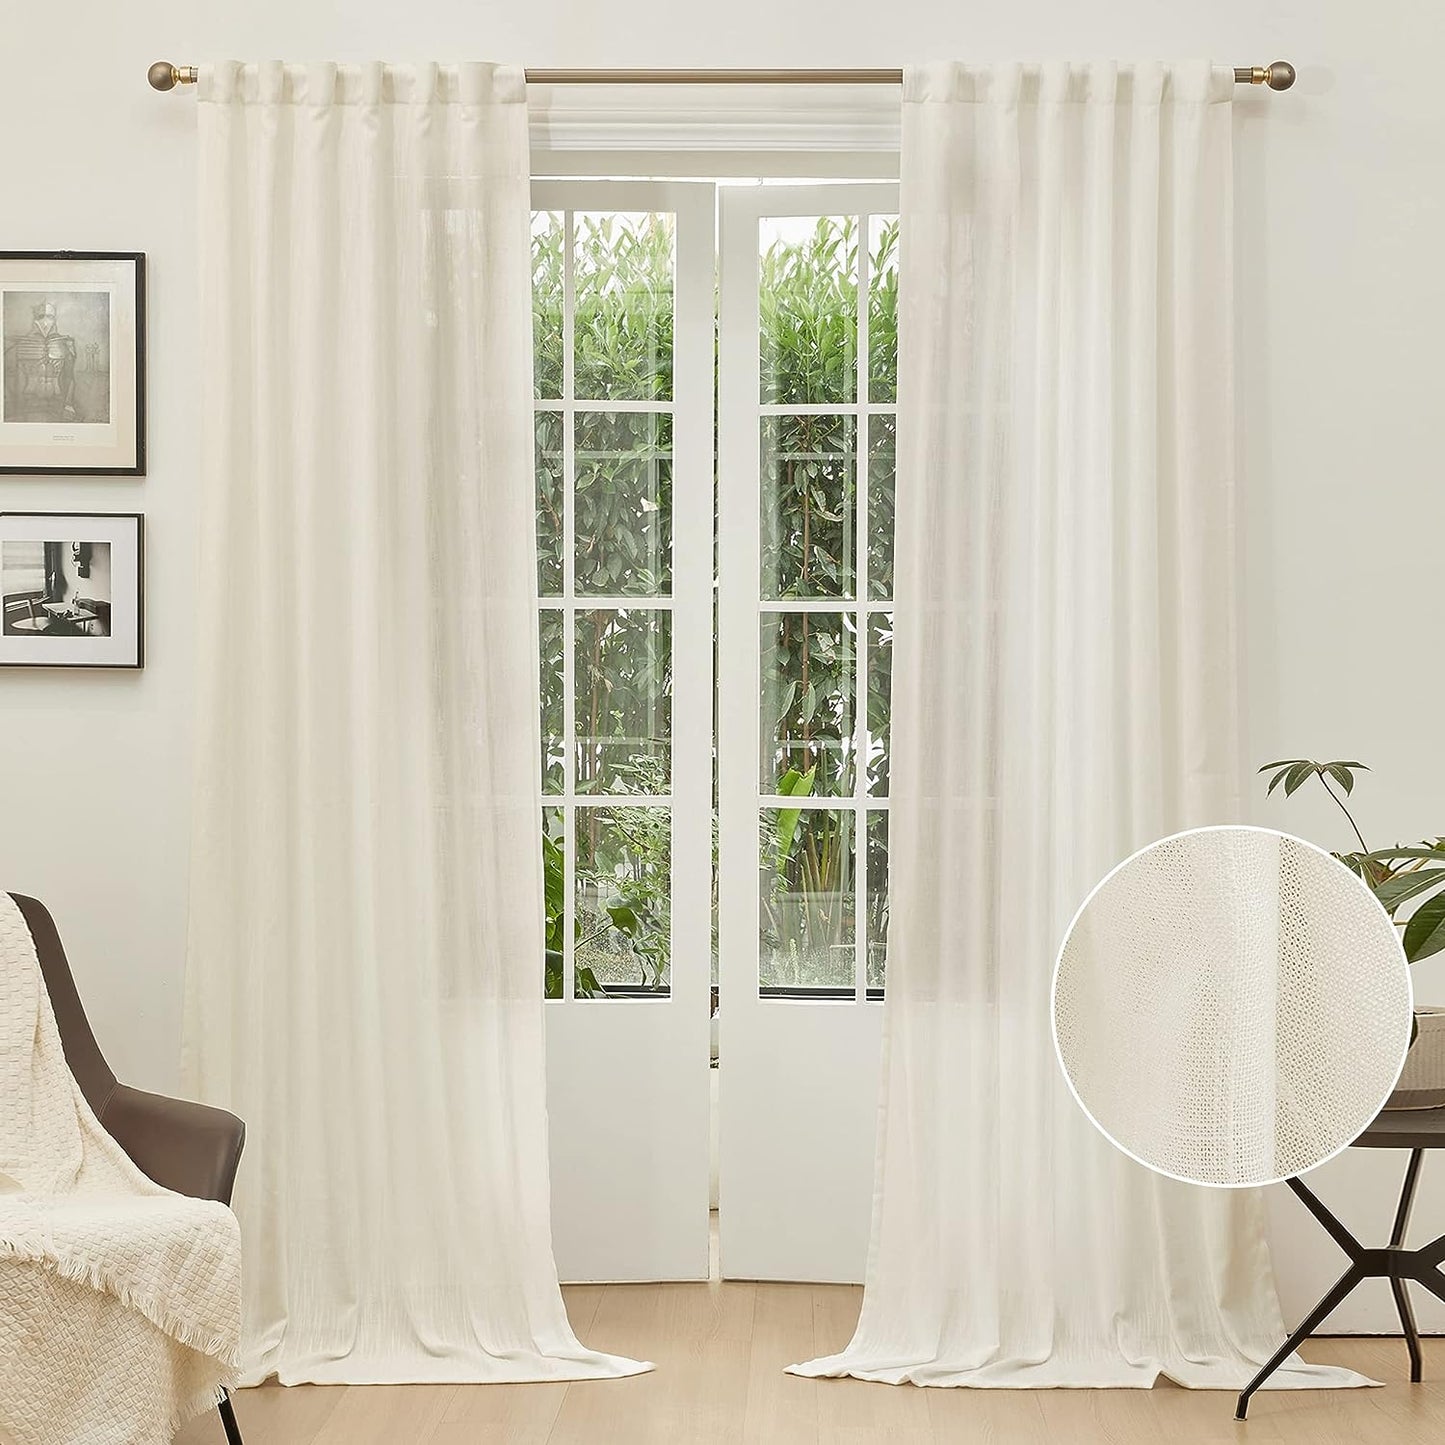 MYSKY HOME 90 Inch Curtains for Sliding Glass Door Windows, Living Room Decoration Cotton Drapes Soft Comfortable Touch Farmhouse Country Patio Treatment Set, 50" Width, Natural, 2 Panels  MYSKYTEX Natural 50"W X 108"L 